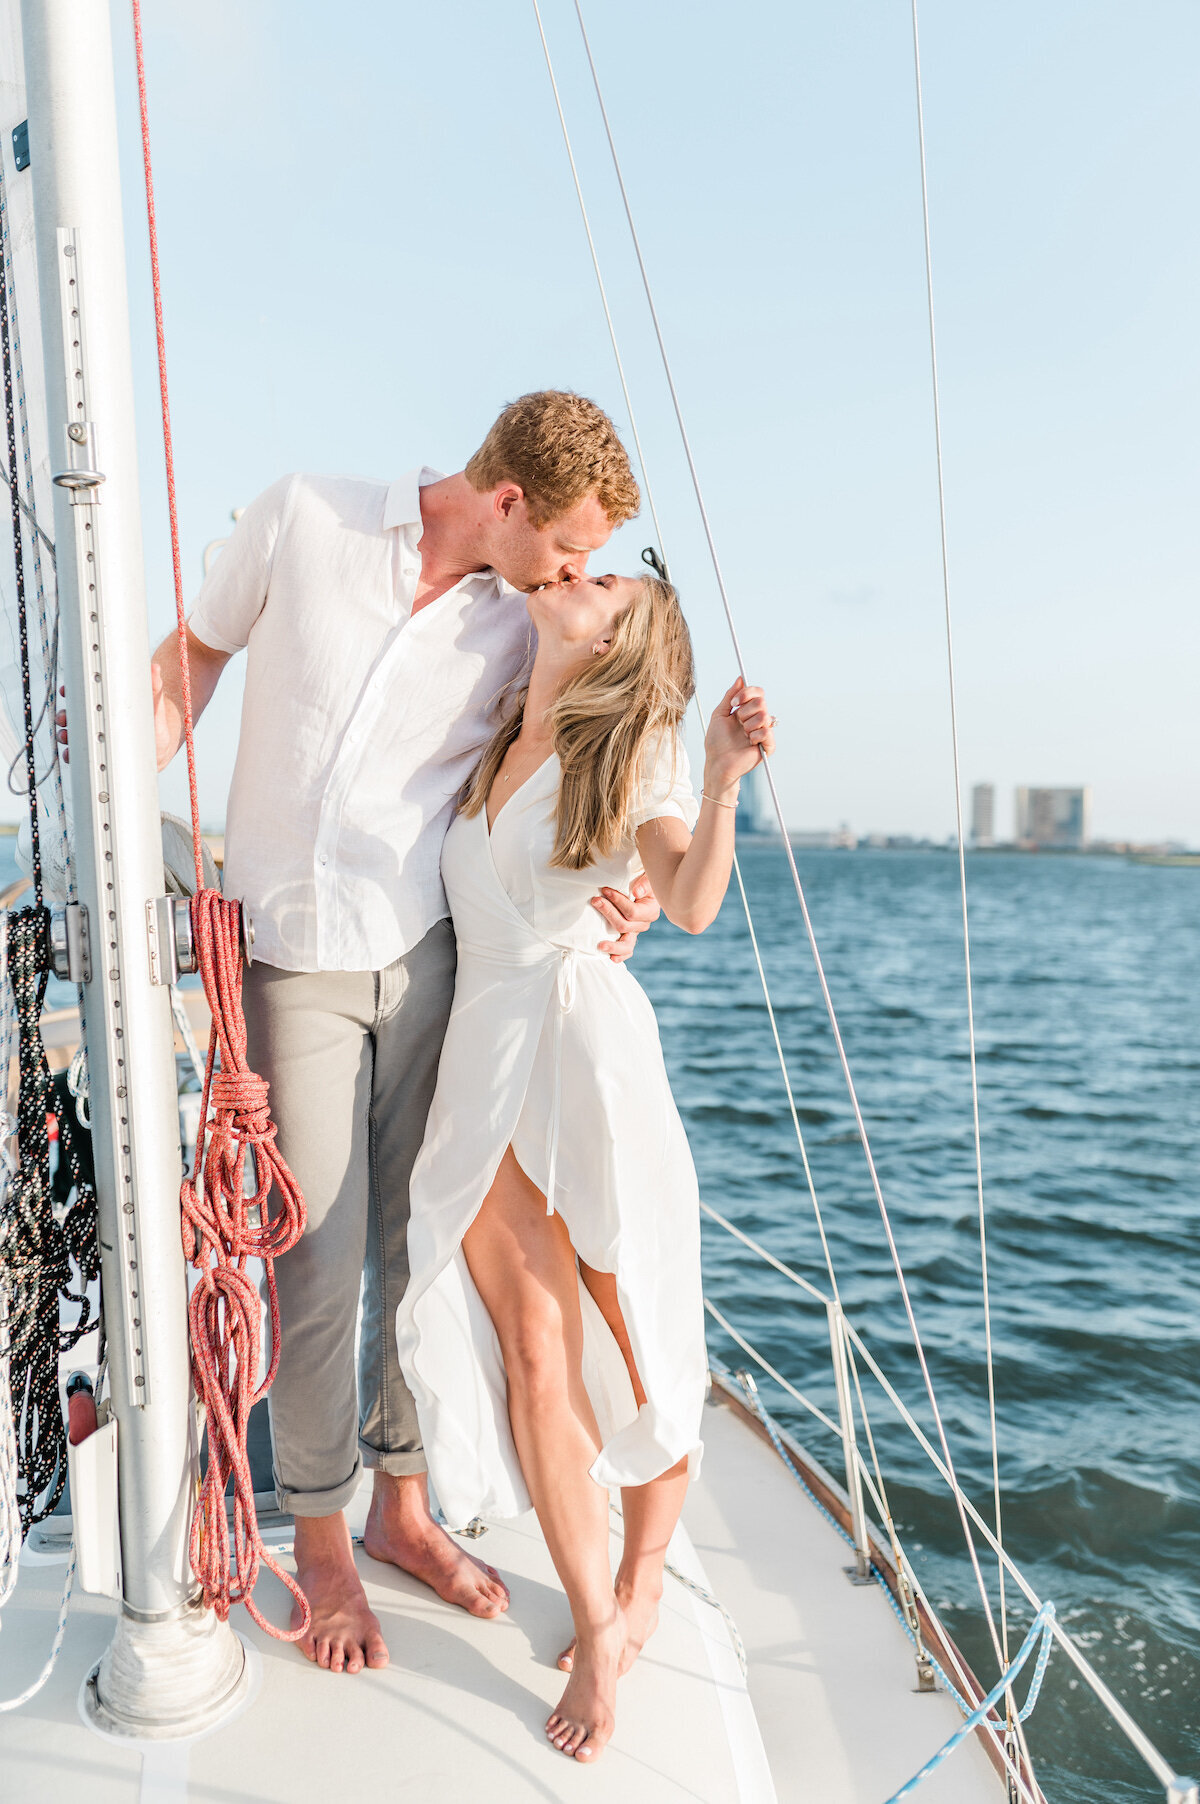 Experience the world through the lens of love with our destination luxury engagement photography. Our editorial aesthetic elevates your connection, crafting images that showcase both your relationship and the stunning landscapes.